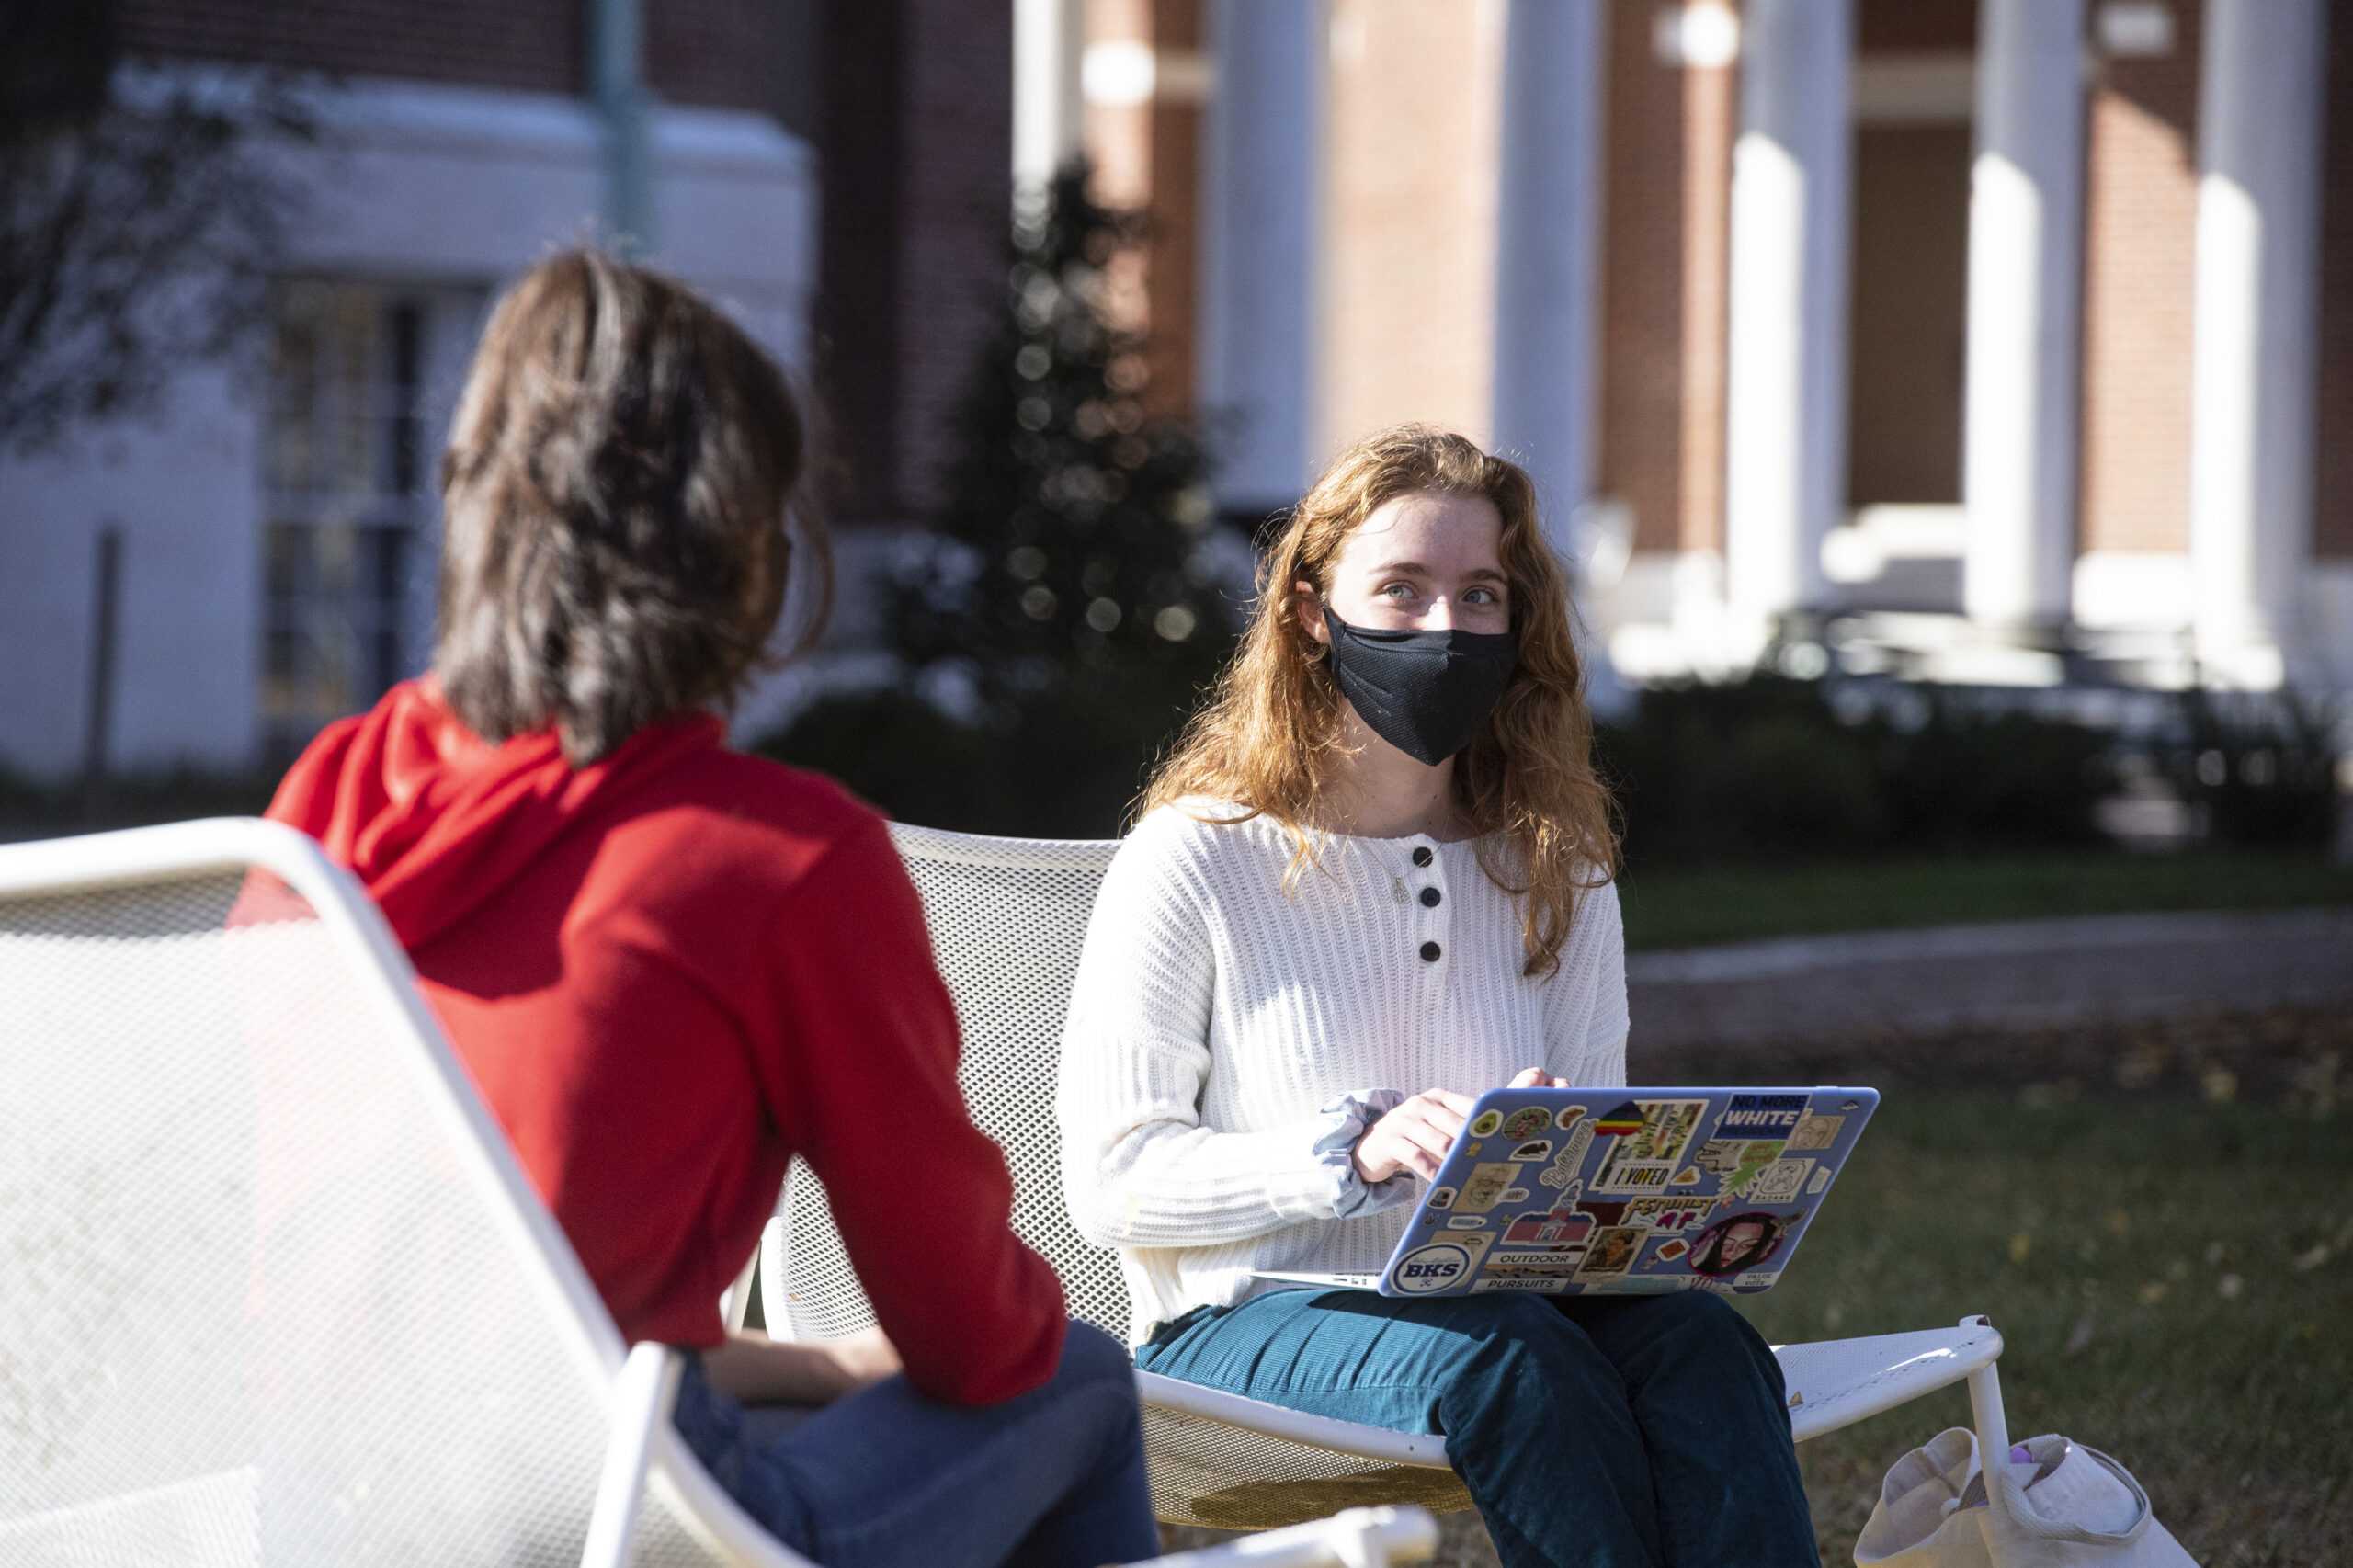 JHU students on campus wearing masks during the Covid 19 pandemic.